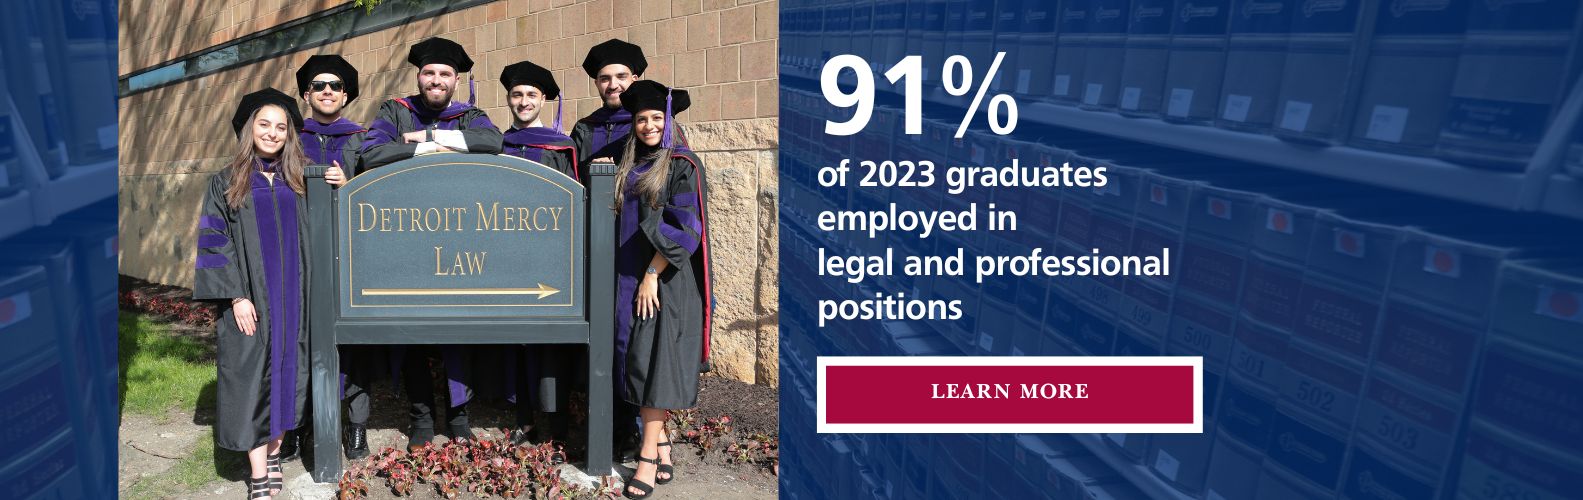 91% of 2020 graduates employed in legal positions